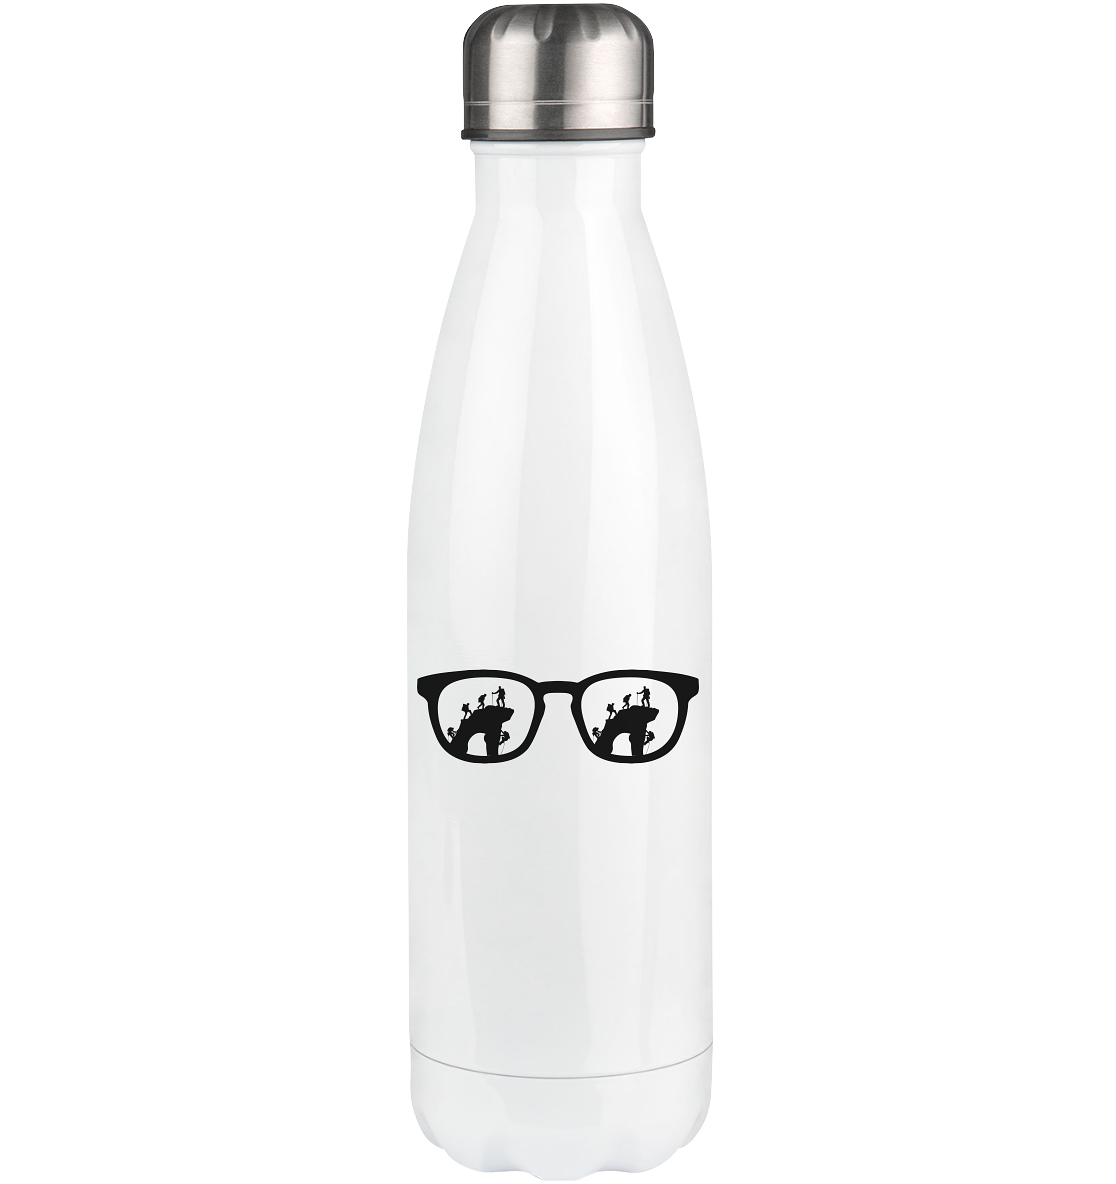 Sunglasses and Climbing - Edelstahl Thermosflasche klettern 500ml